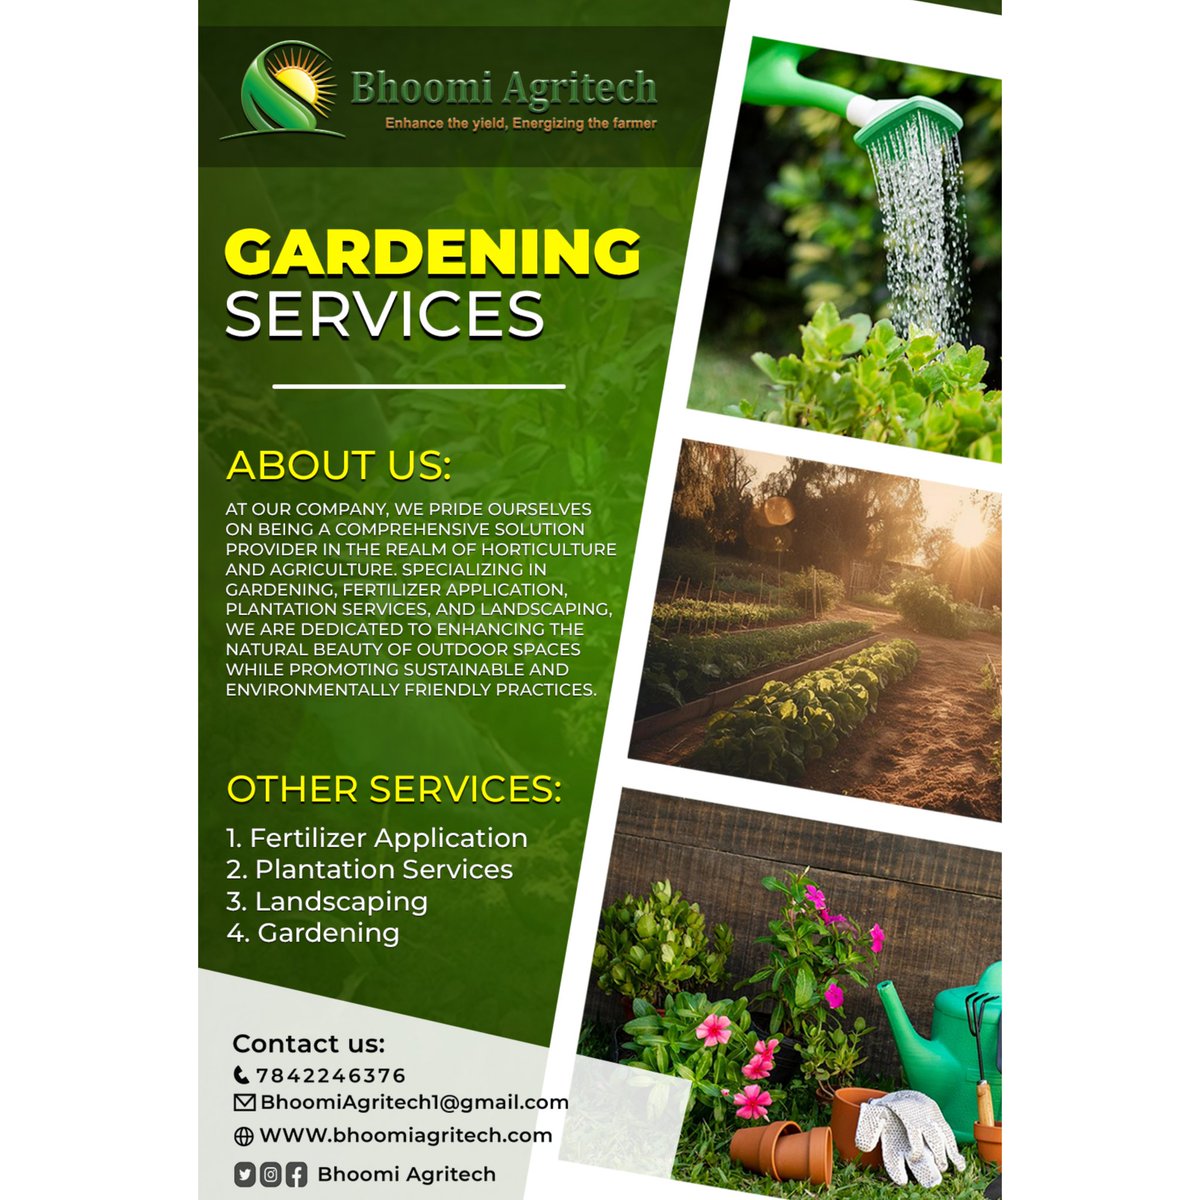 To plant a garden is to believe in tomorrow.
We provide #gardeningservices , 
For #domestic
#business
#industrialpremises
Do contact us for the given number: 7842246376